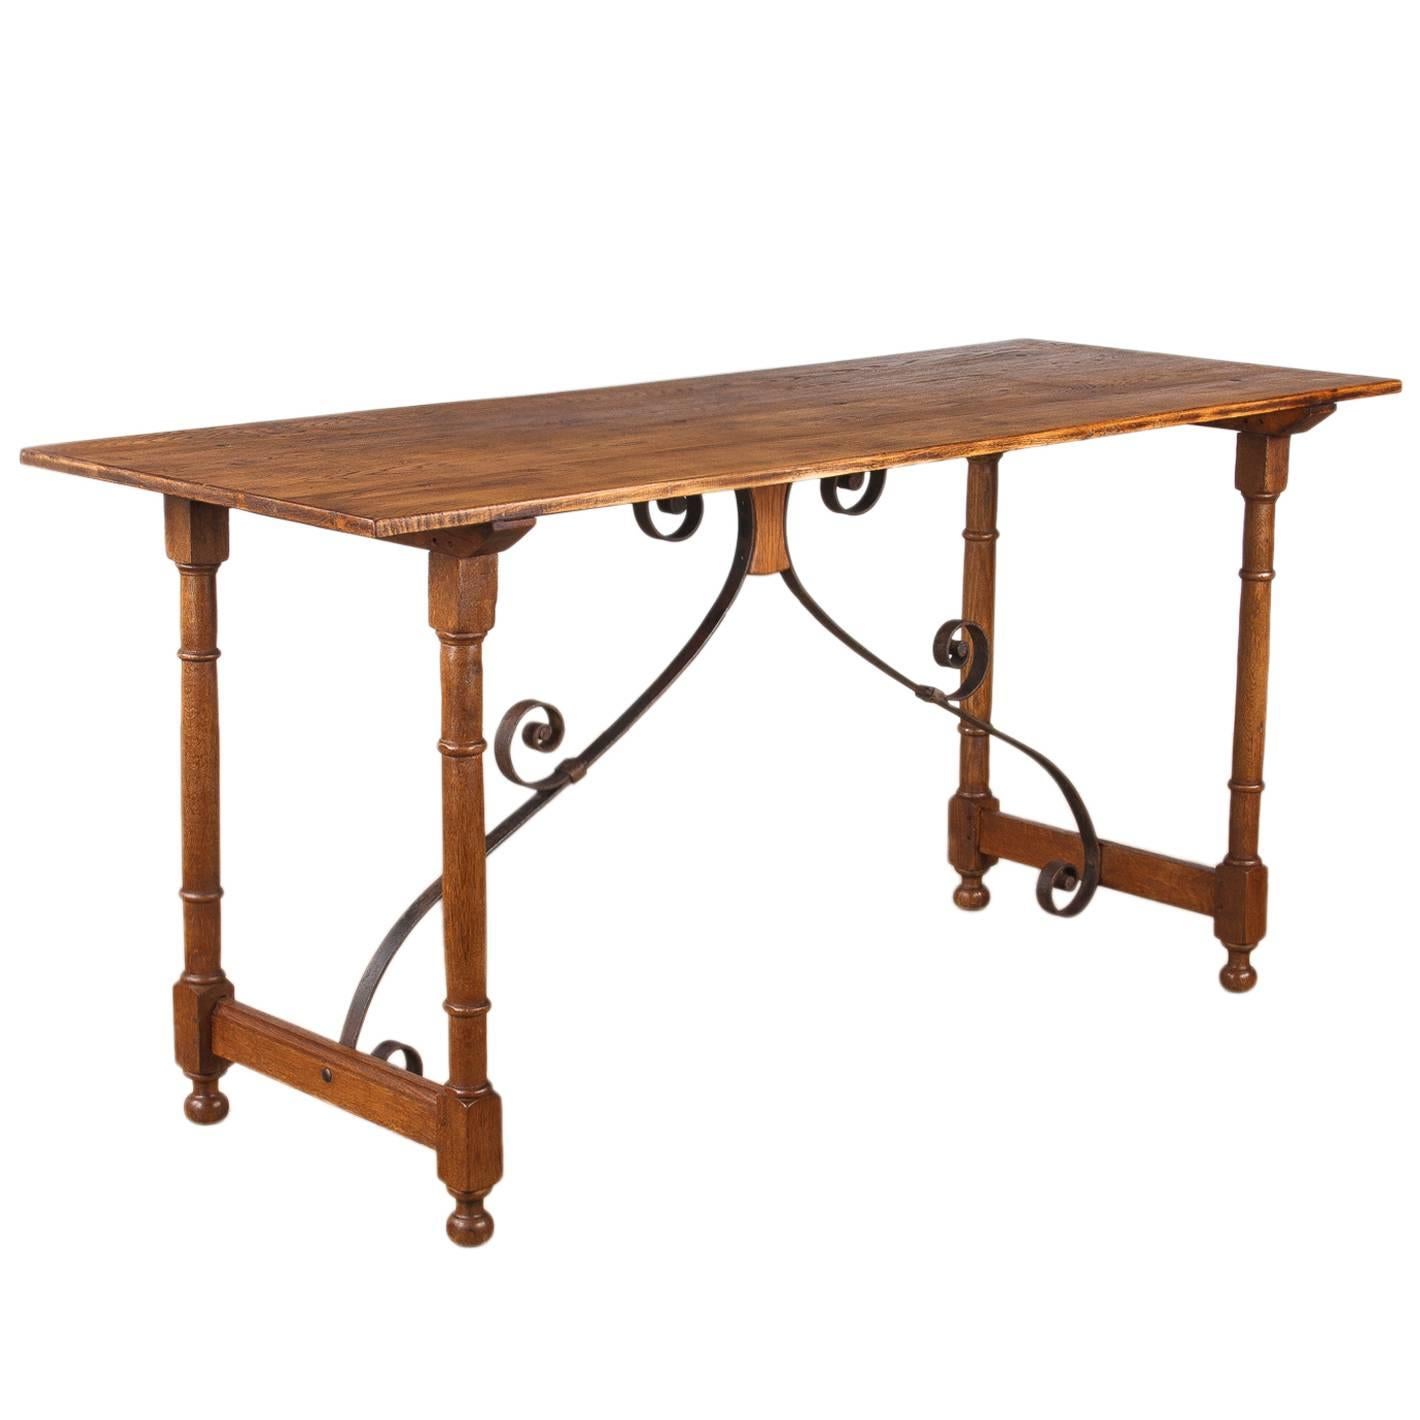 19th Century Spanish Oak Console Table with Iron Stretcher